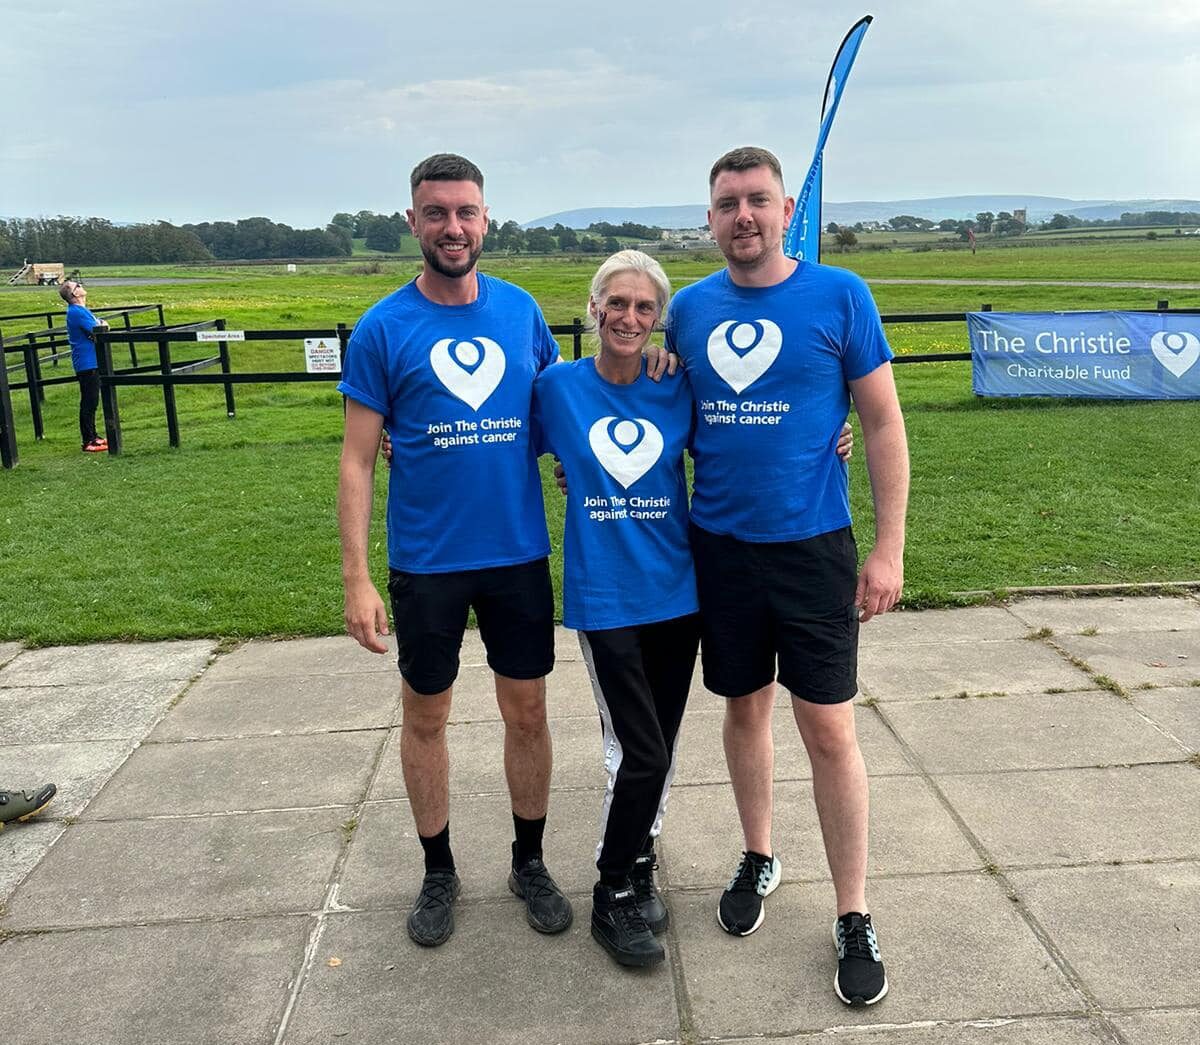 Luke, Kyle and Amanda from The Morning Star in Swinton did a sponsored skydive to raise money for The Christie